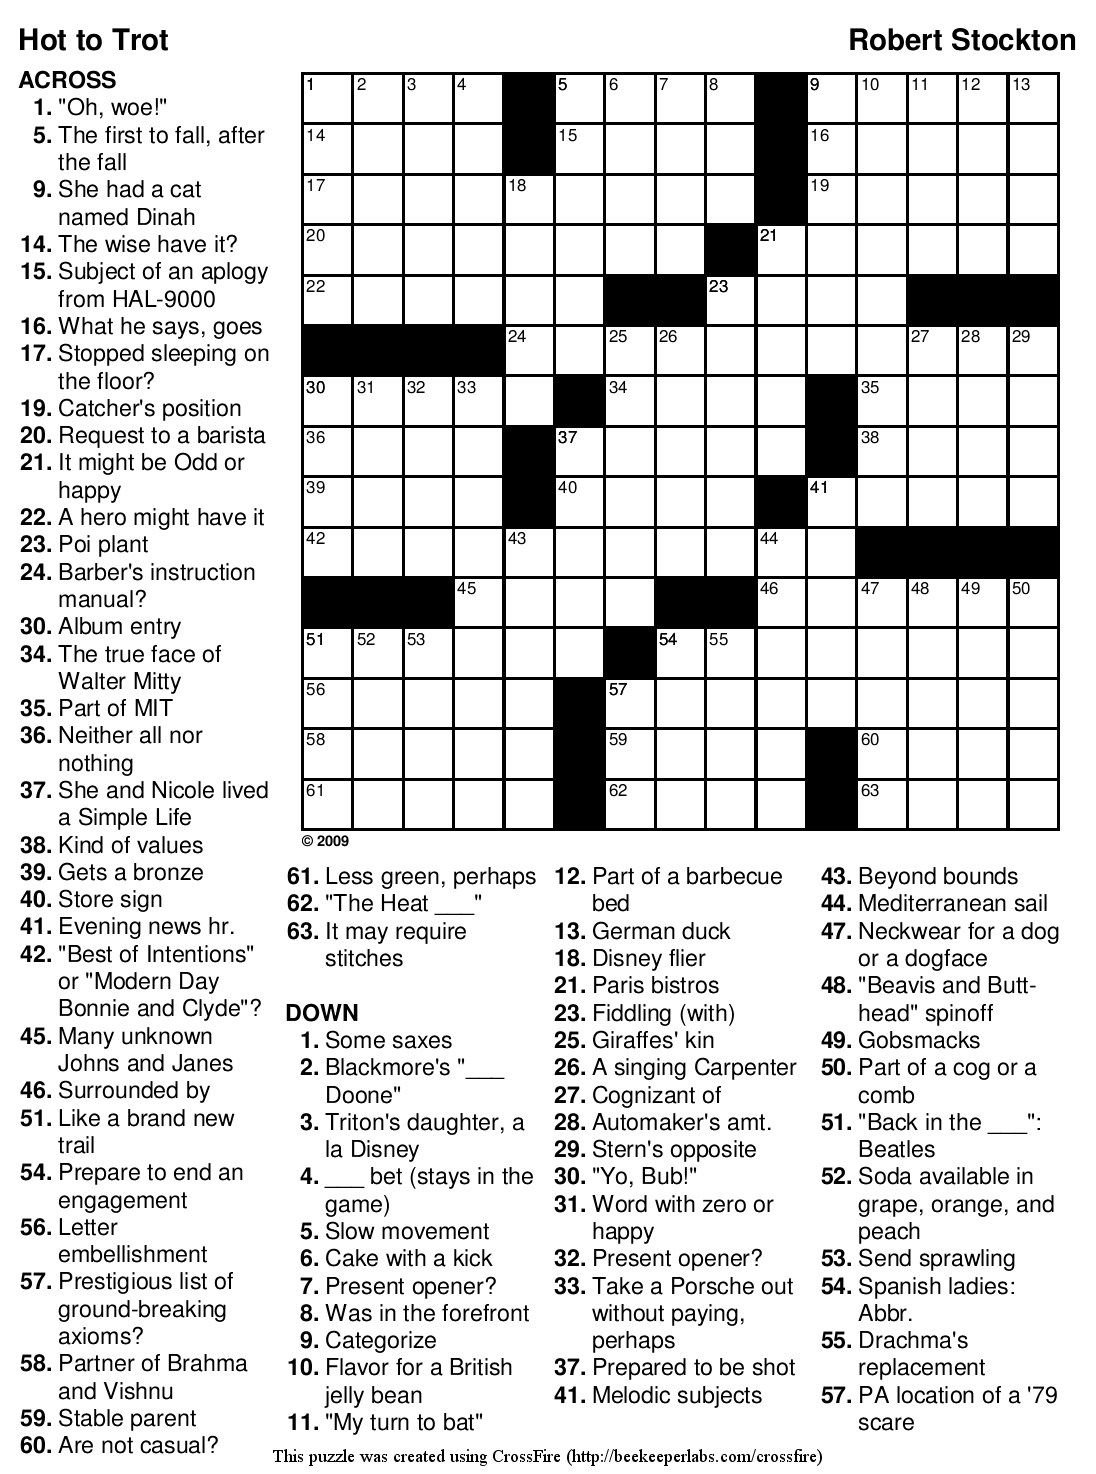 Free Printable Daily Crossword Puzzles (82+ Images In Collection) Page 1 - Printable La Crossword Puzzles